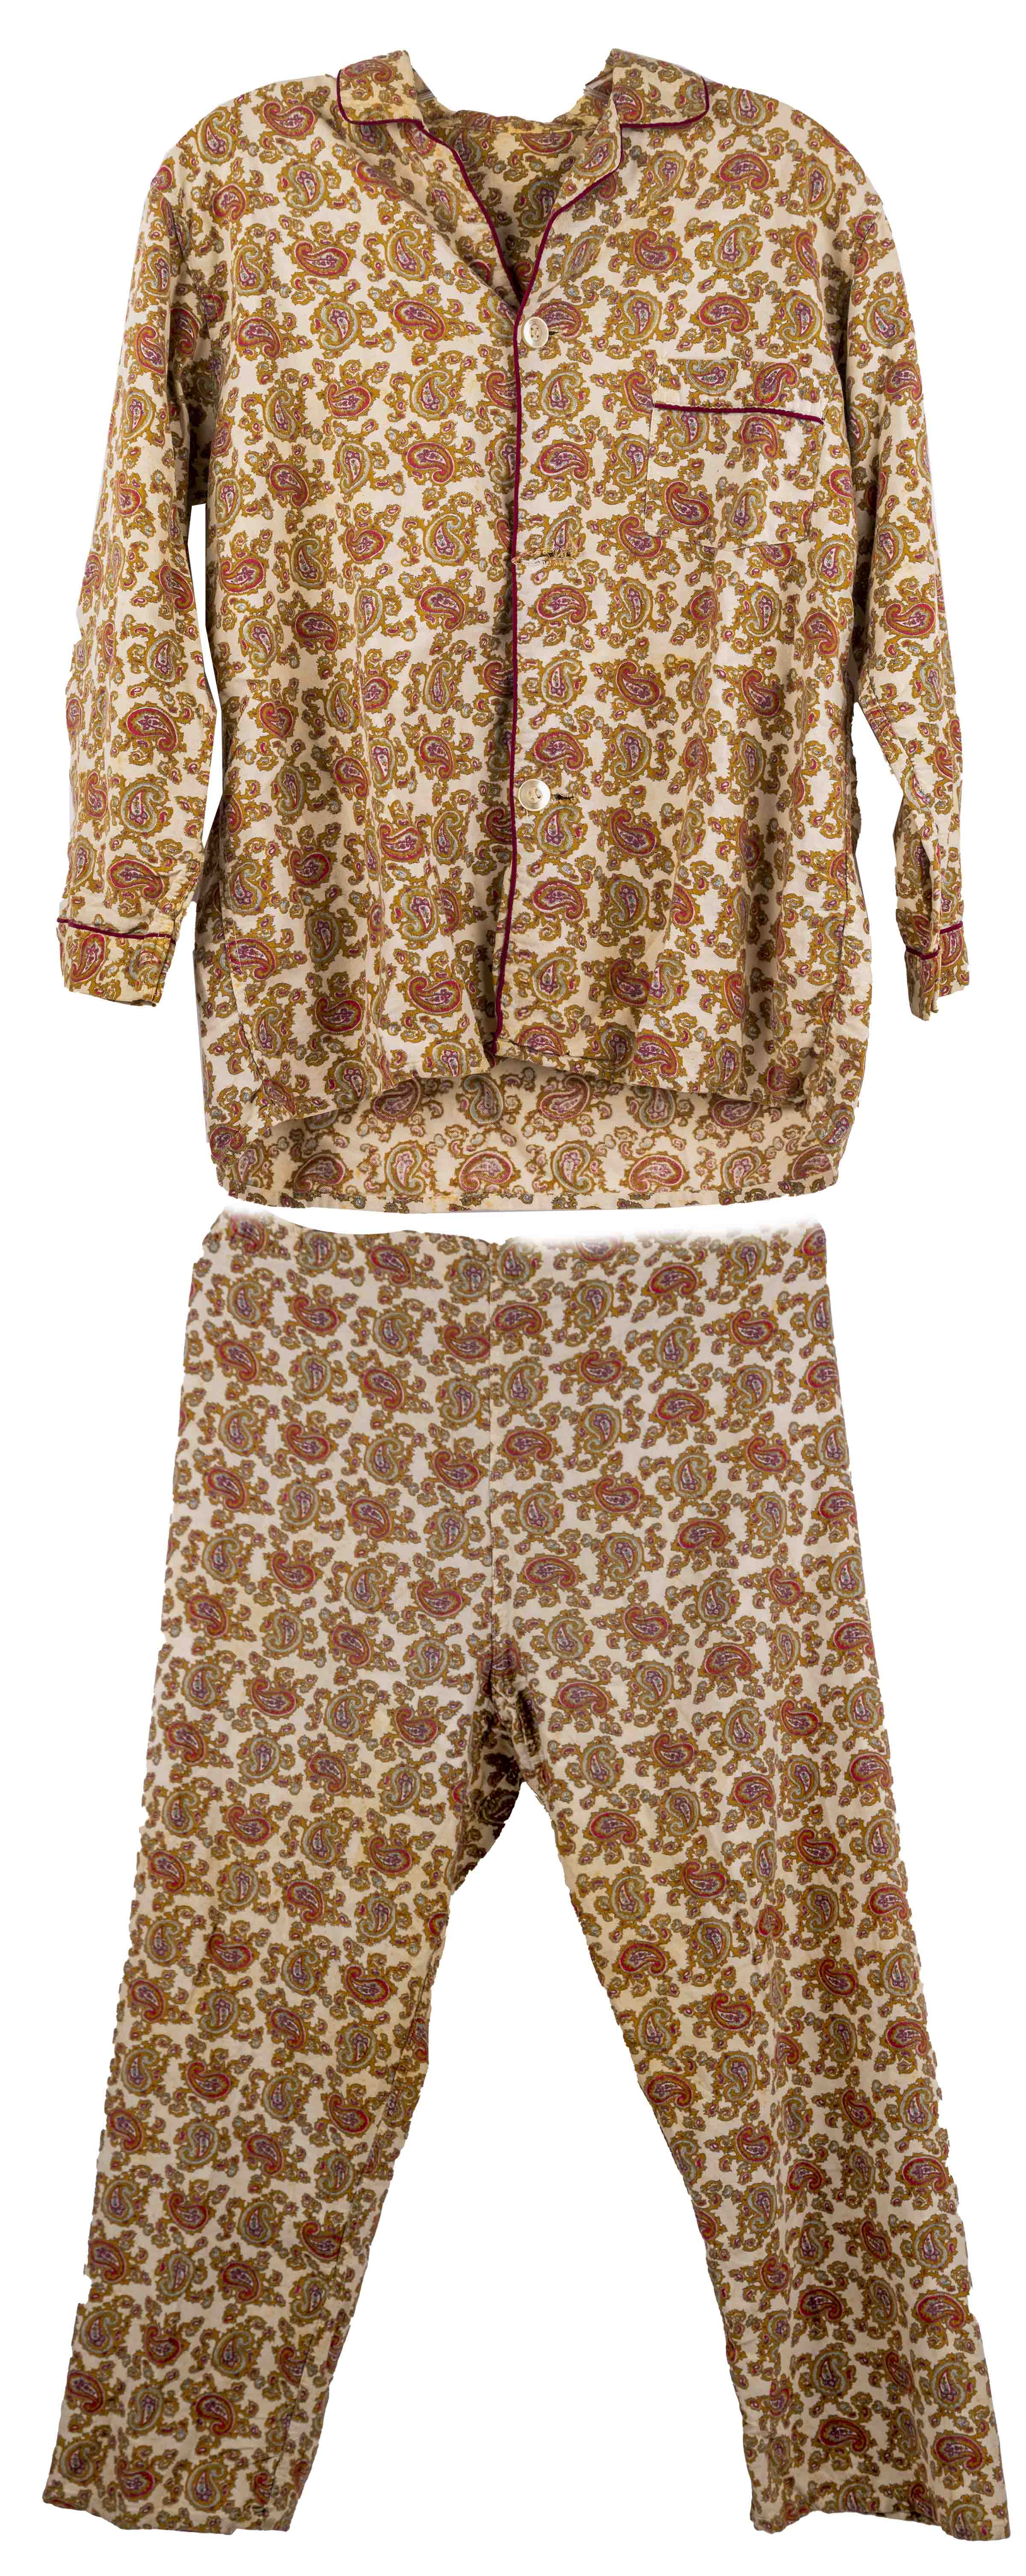 Lot Detail - Bruce Lee's Personally Owned & Worn Pajamas in a Paisley ...